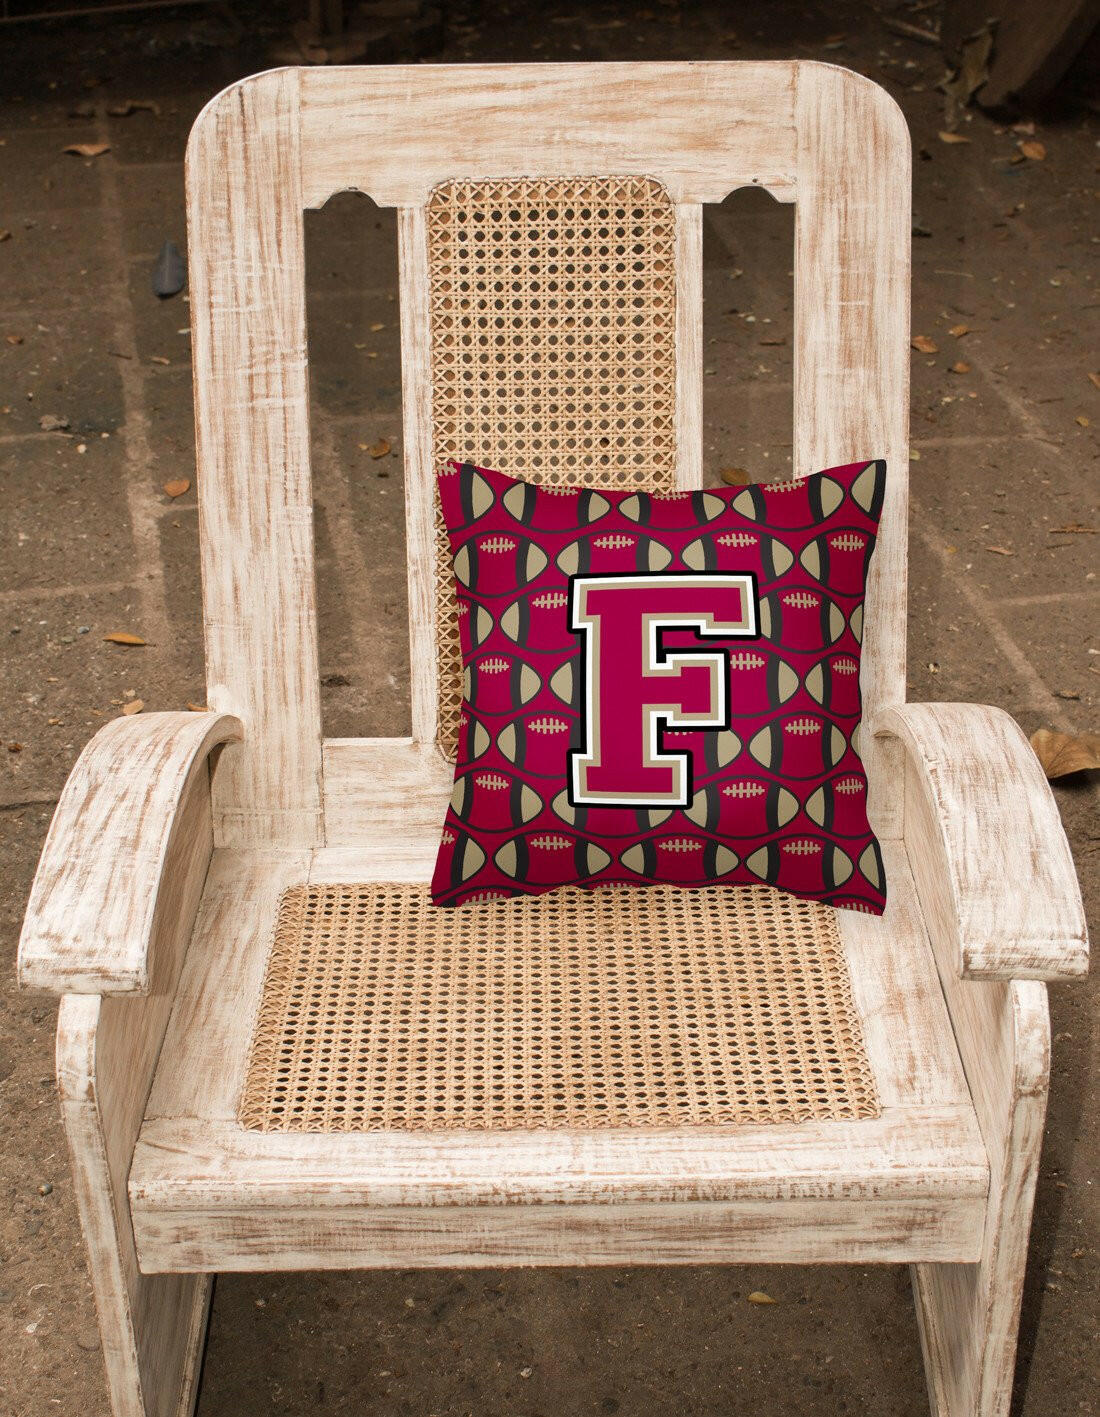 Letter F Football Garnet and Gold Fabric Decorative Pillow CJ1078-FPW1414 by Caroline's Treasures